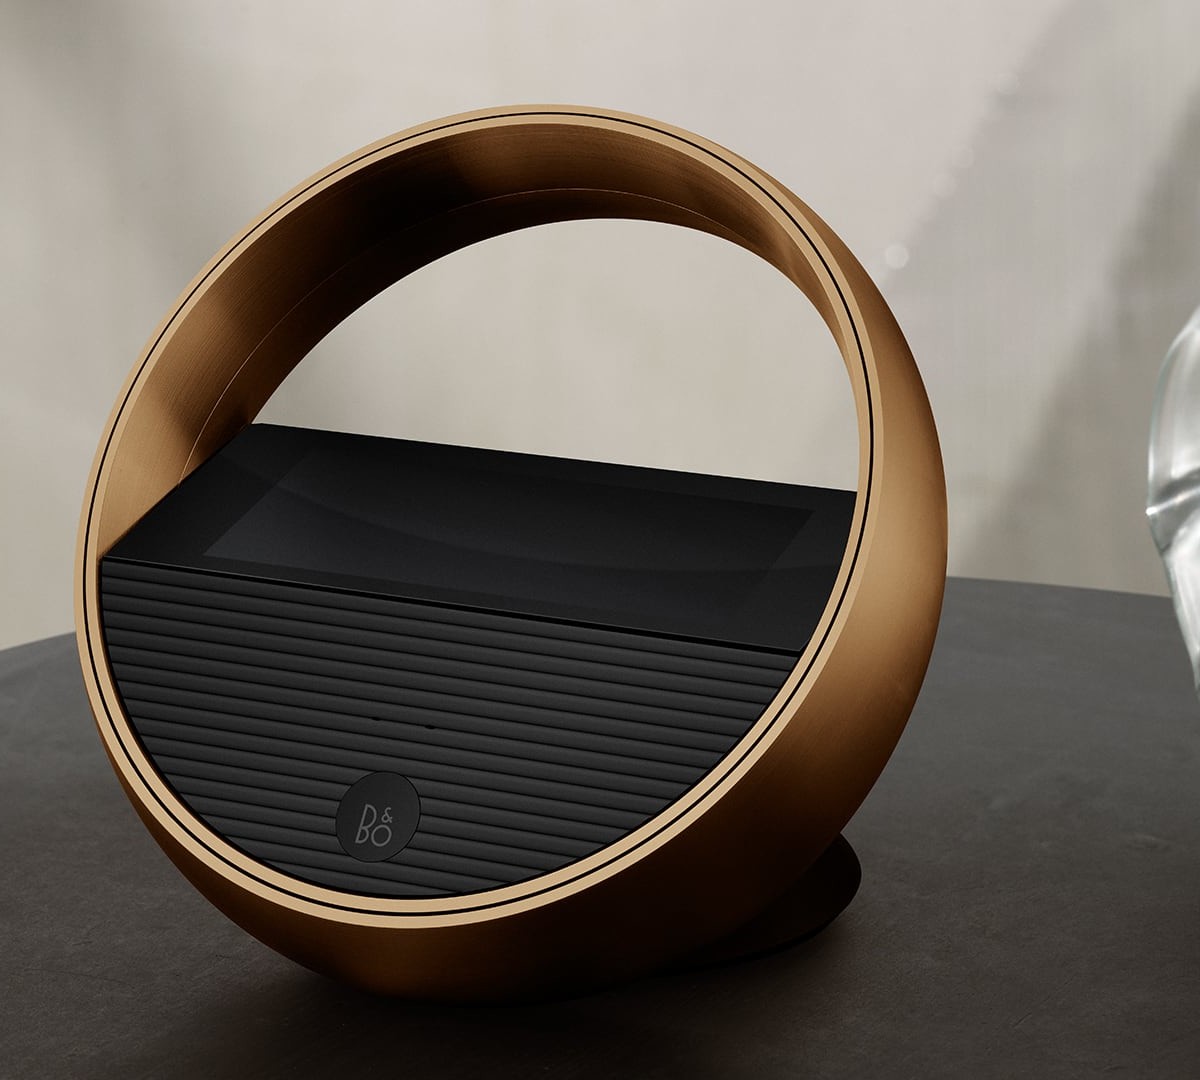 Bang & Olufsen Beoremote Halo music remote control navigates your sound system